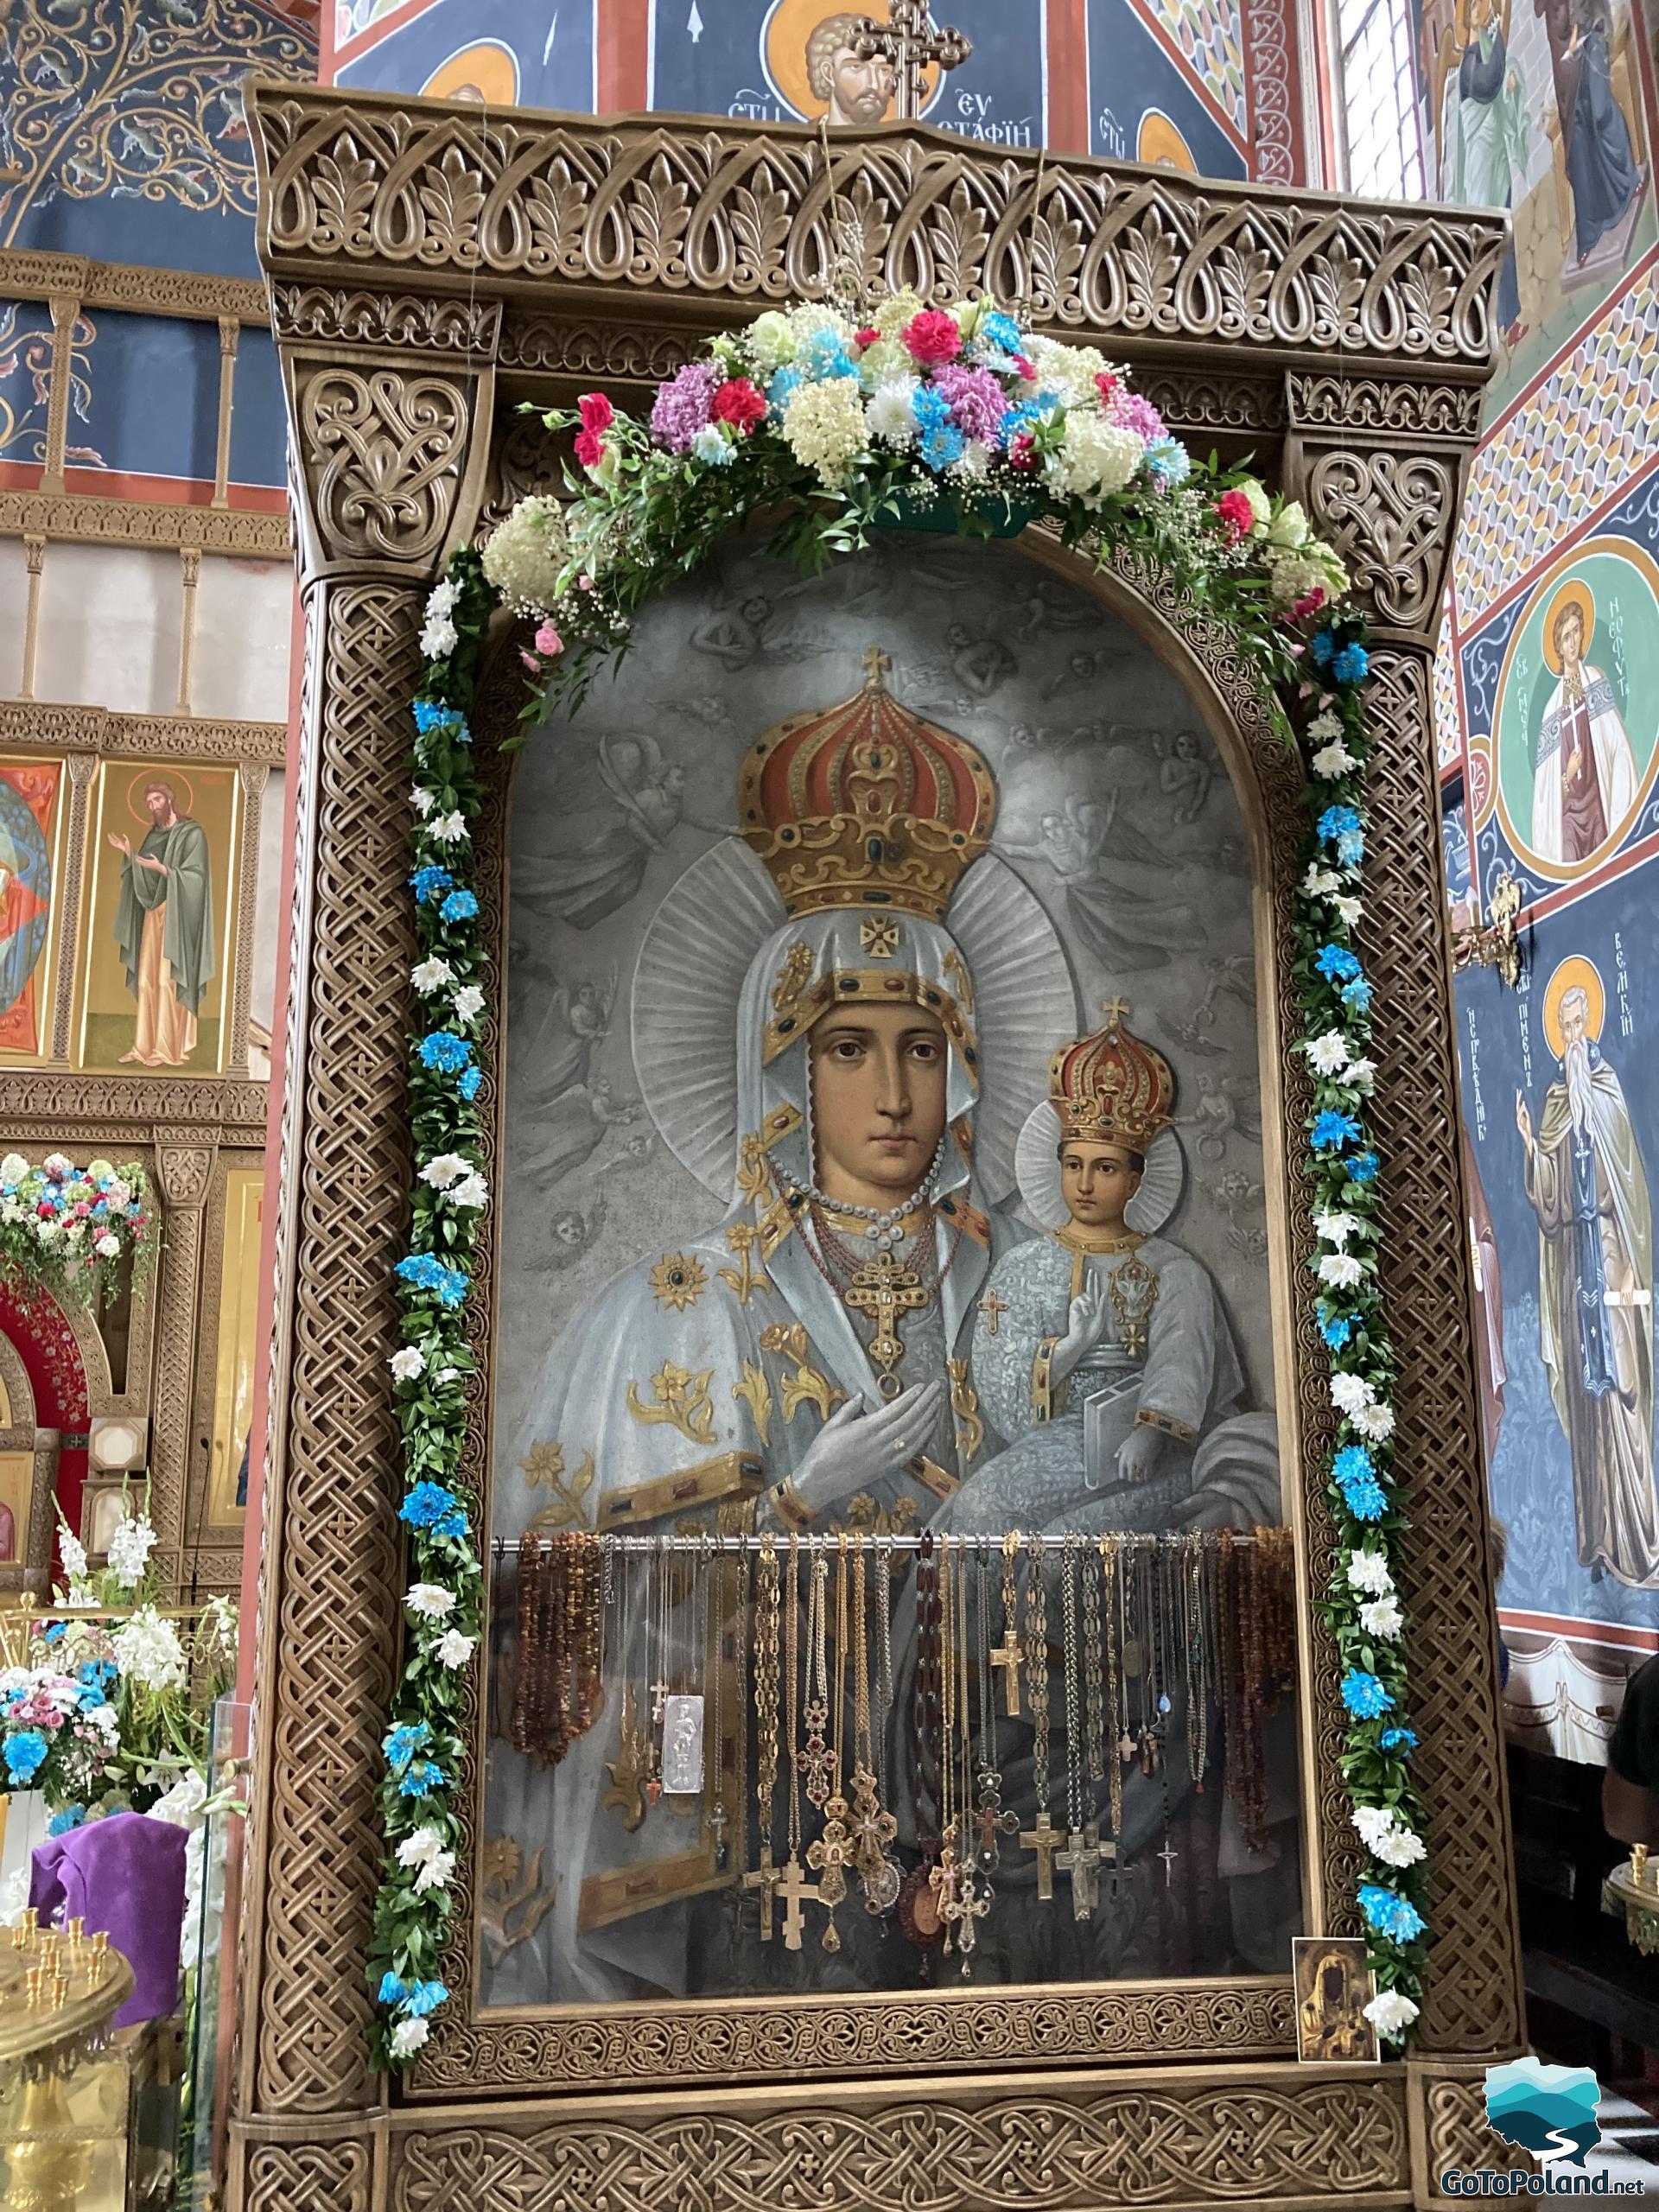 image of Our Lady of Supraska